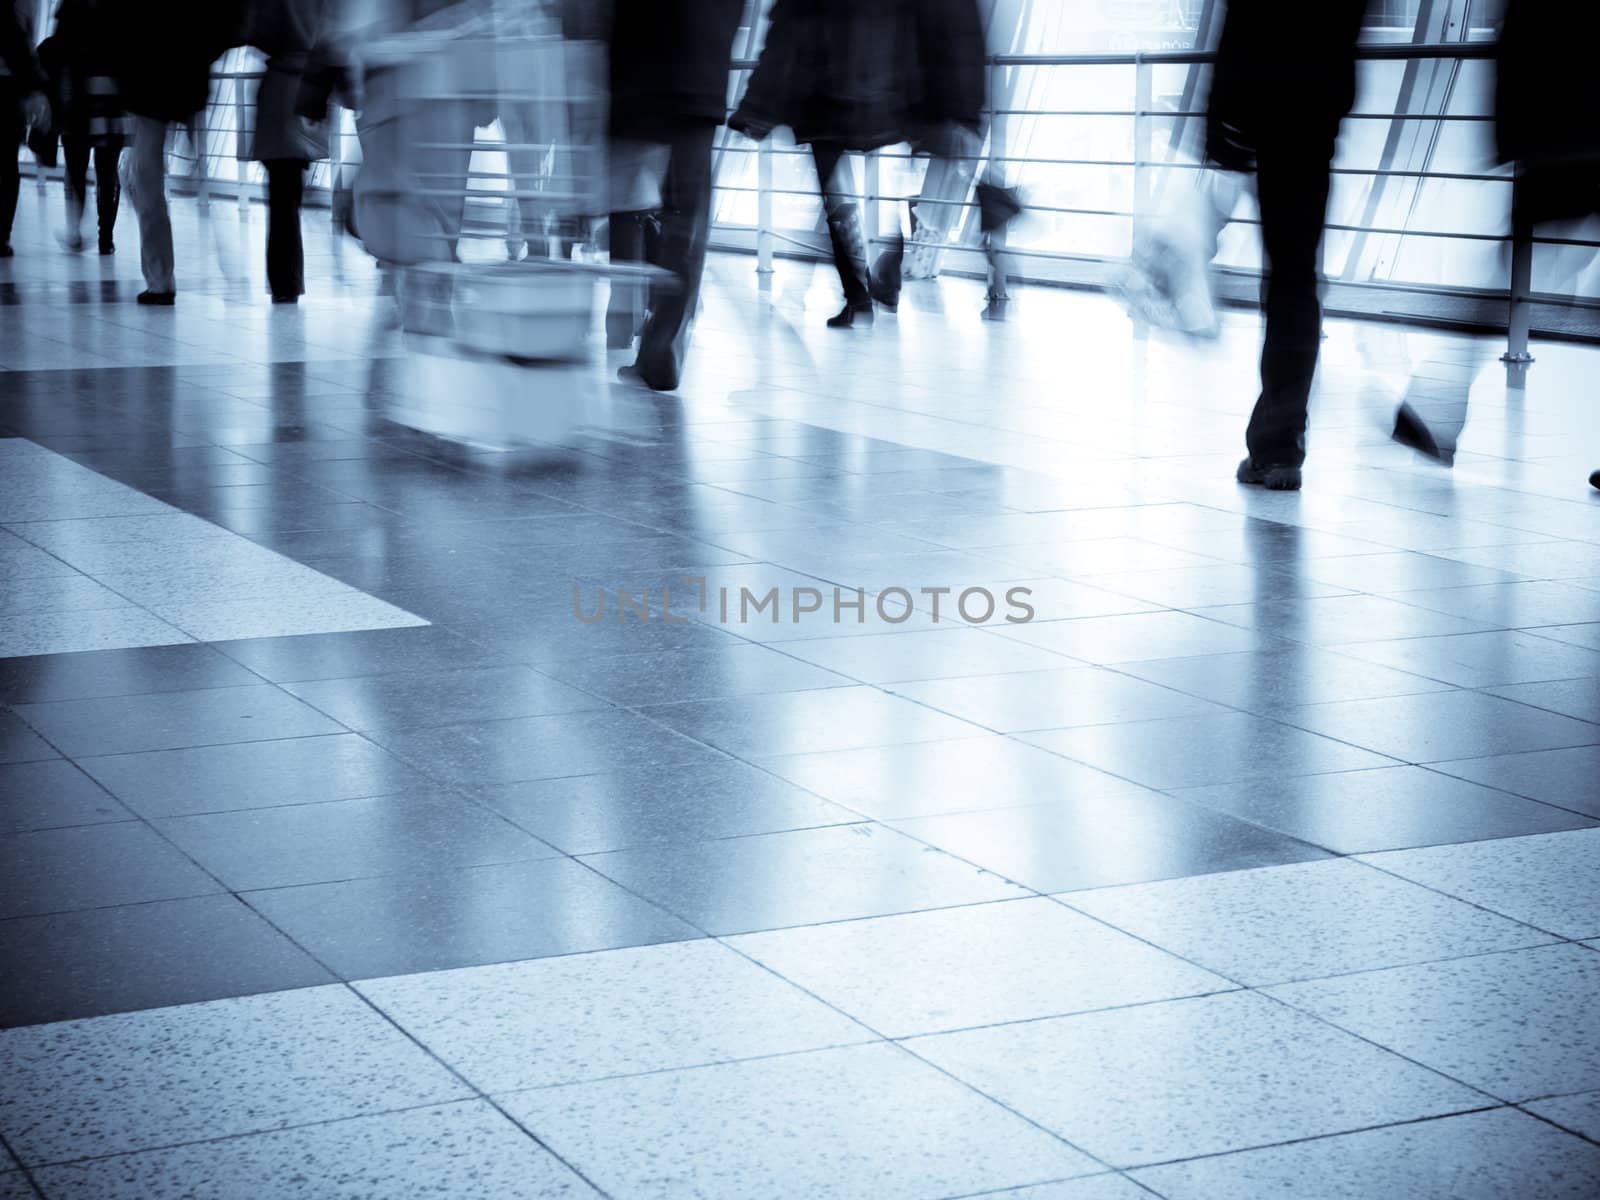 People walking in a shopping center